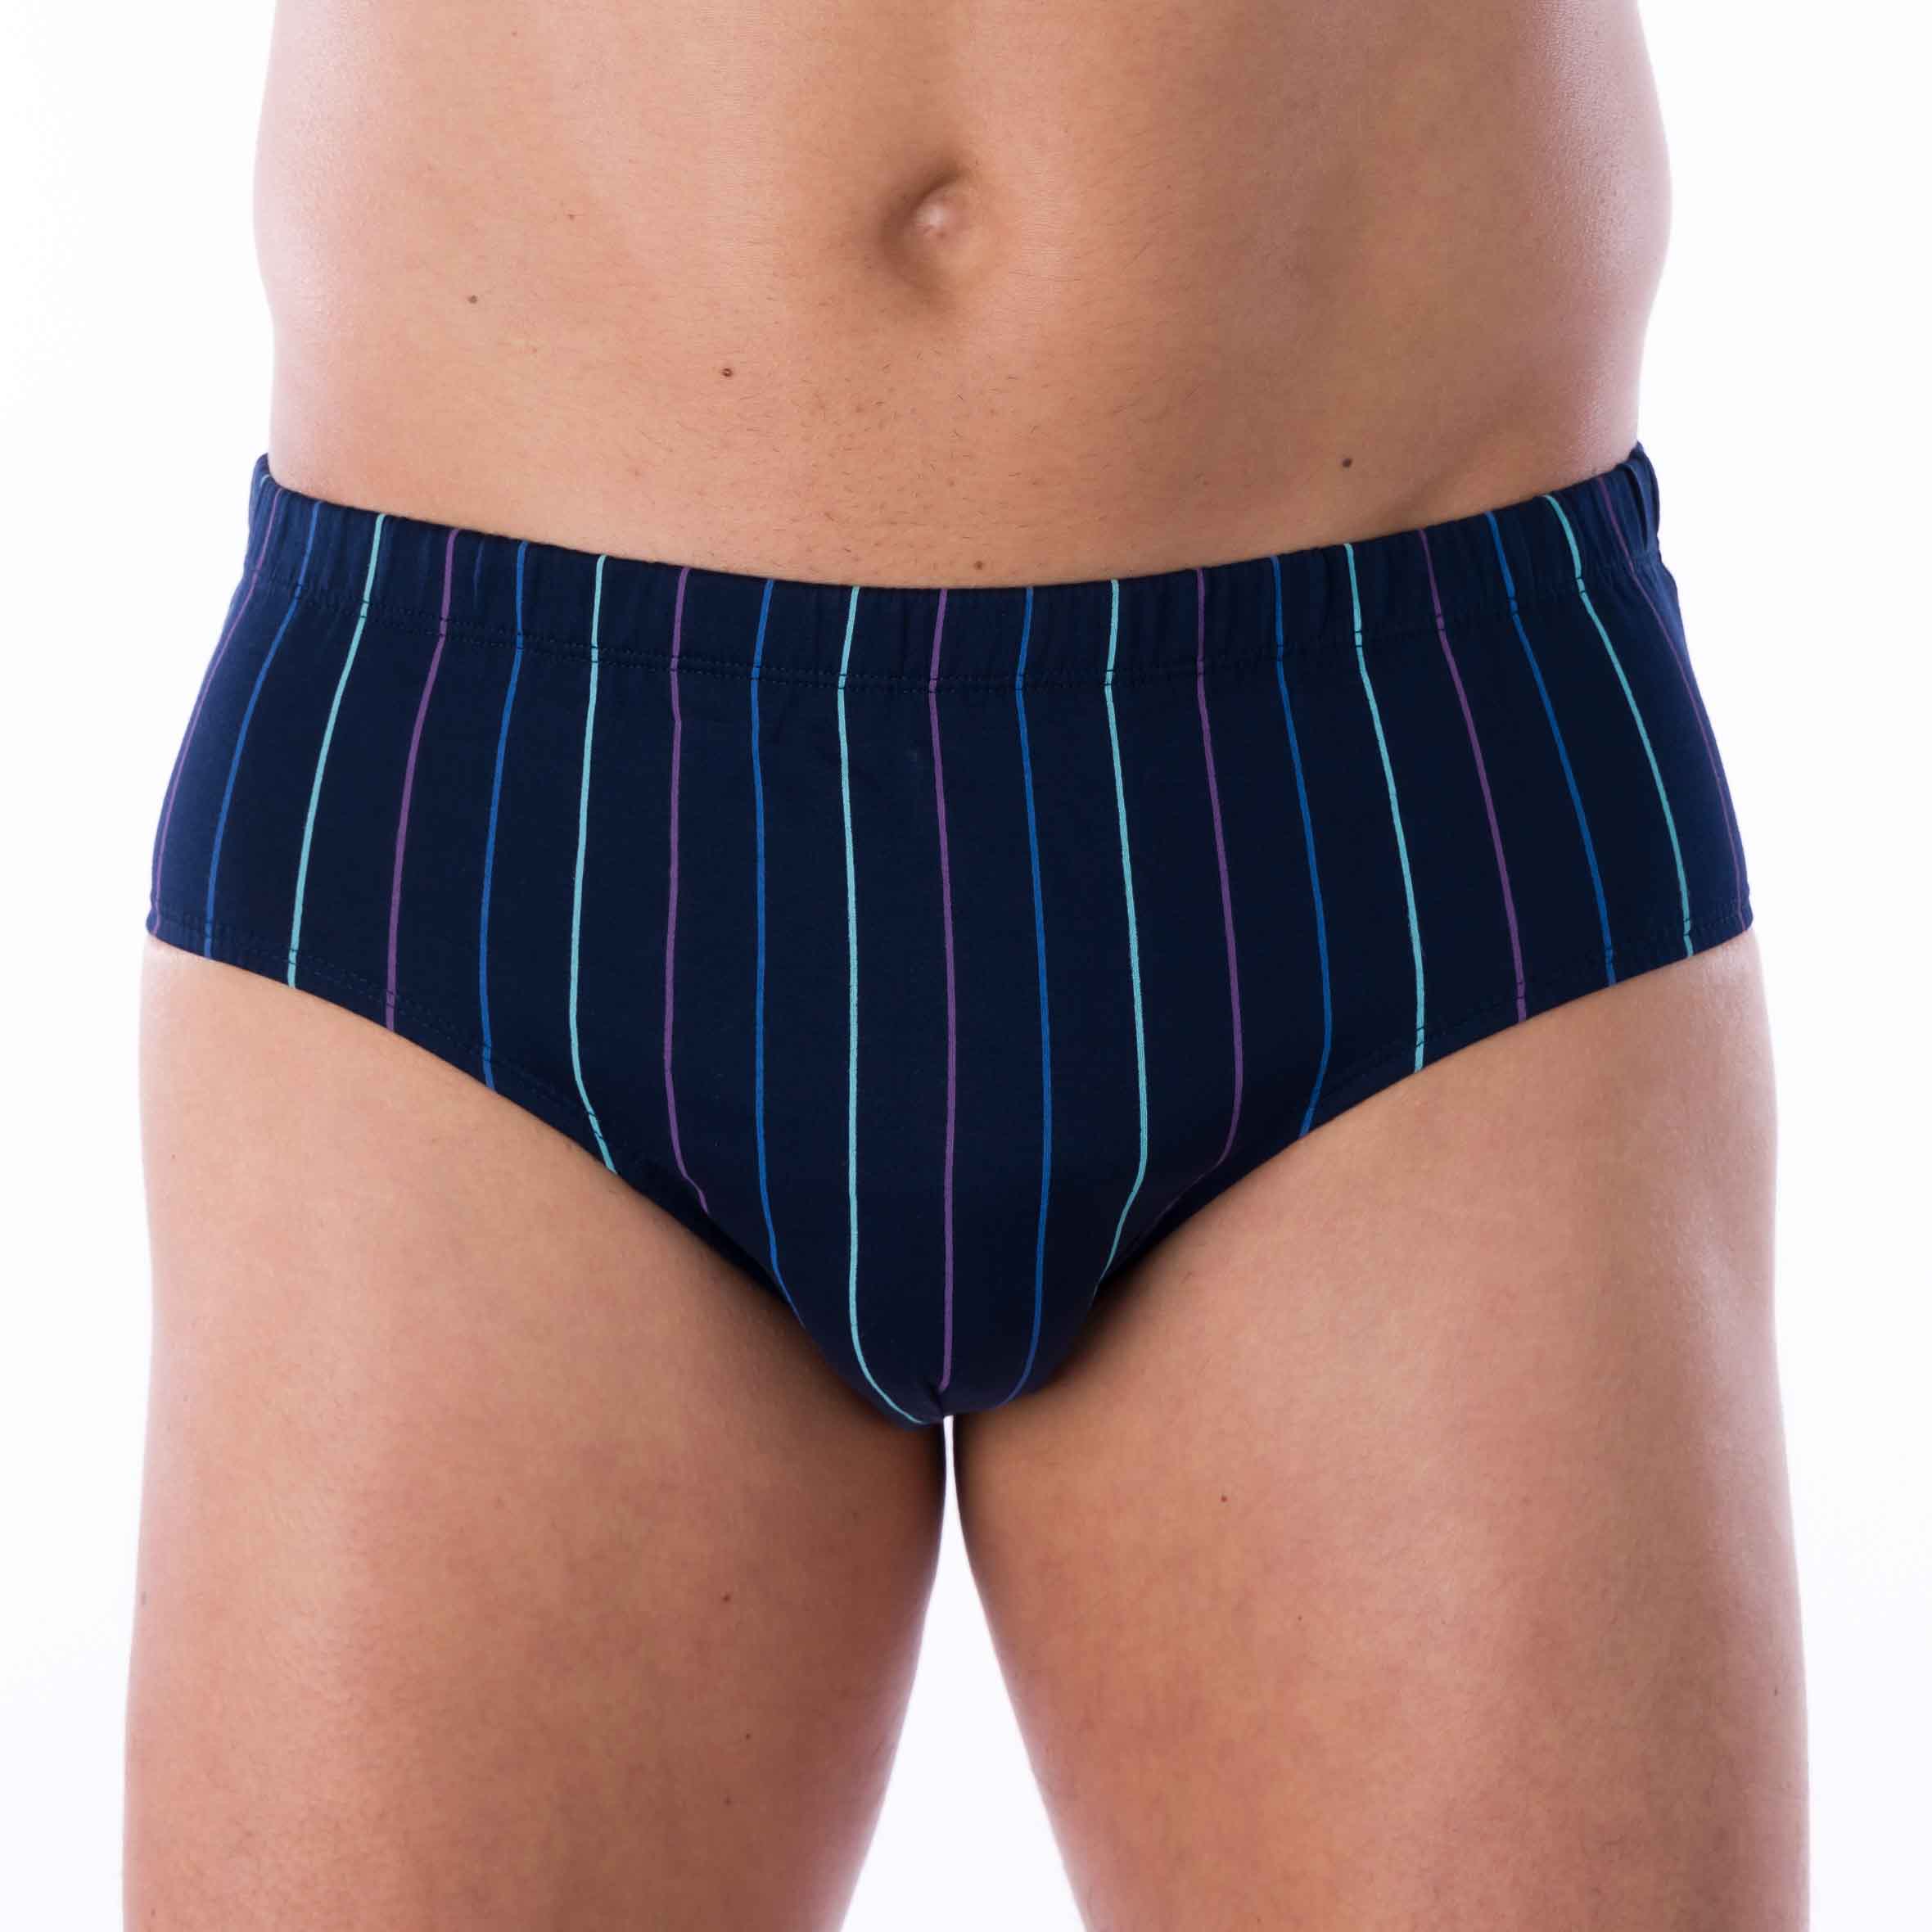 Pack of 2 HIGH Waist Briefs in NAVY and BLUE Printed Mercerized Cotton Jersey